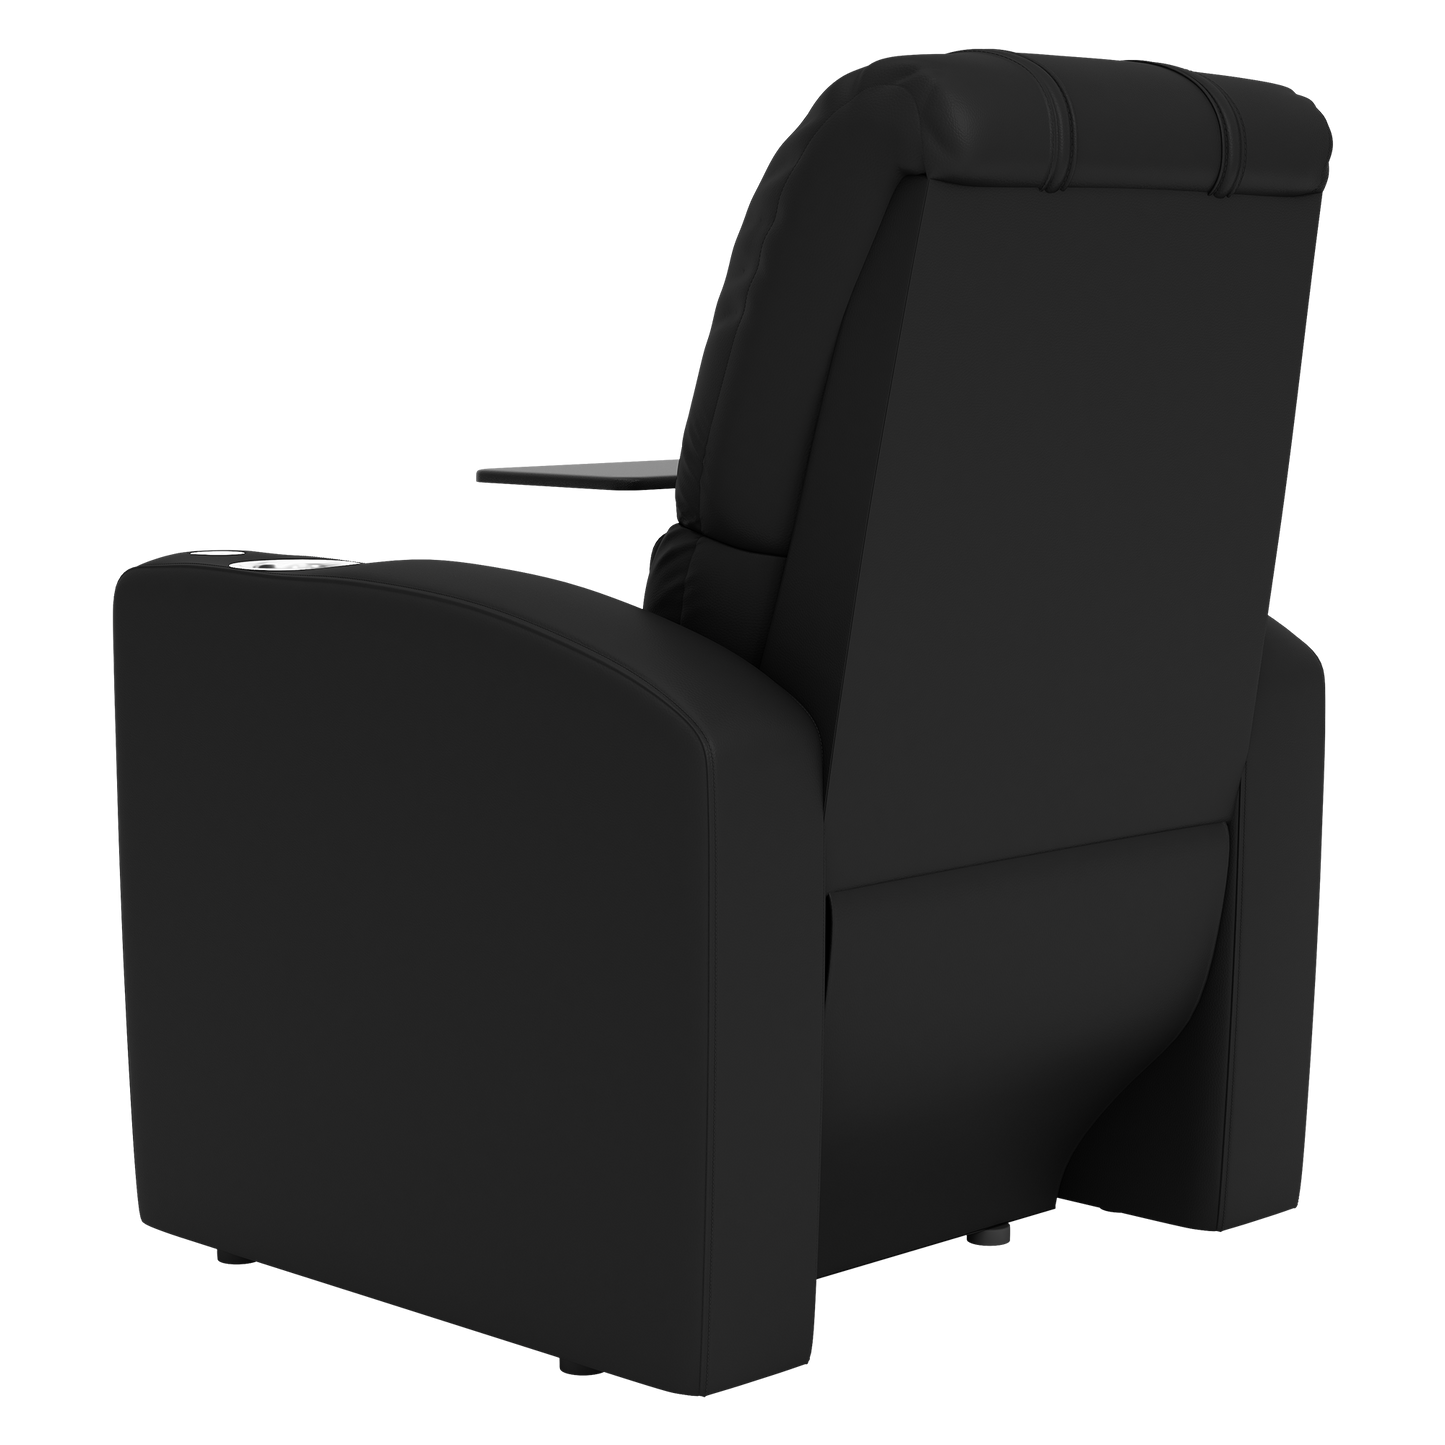 Stealth Power Plus Recliner with Charlotte Hornets Secondary